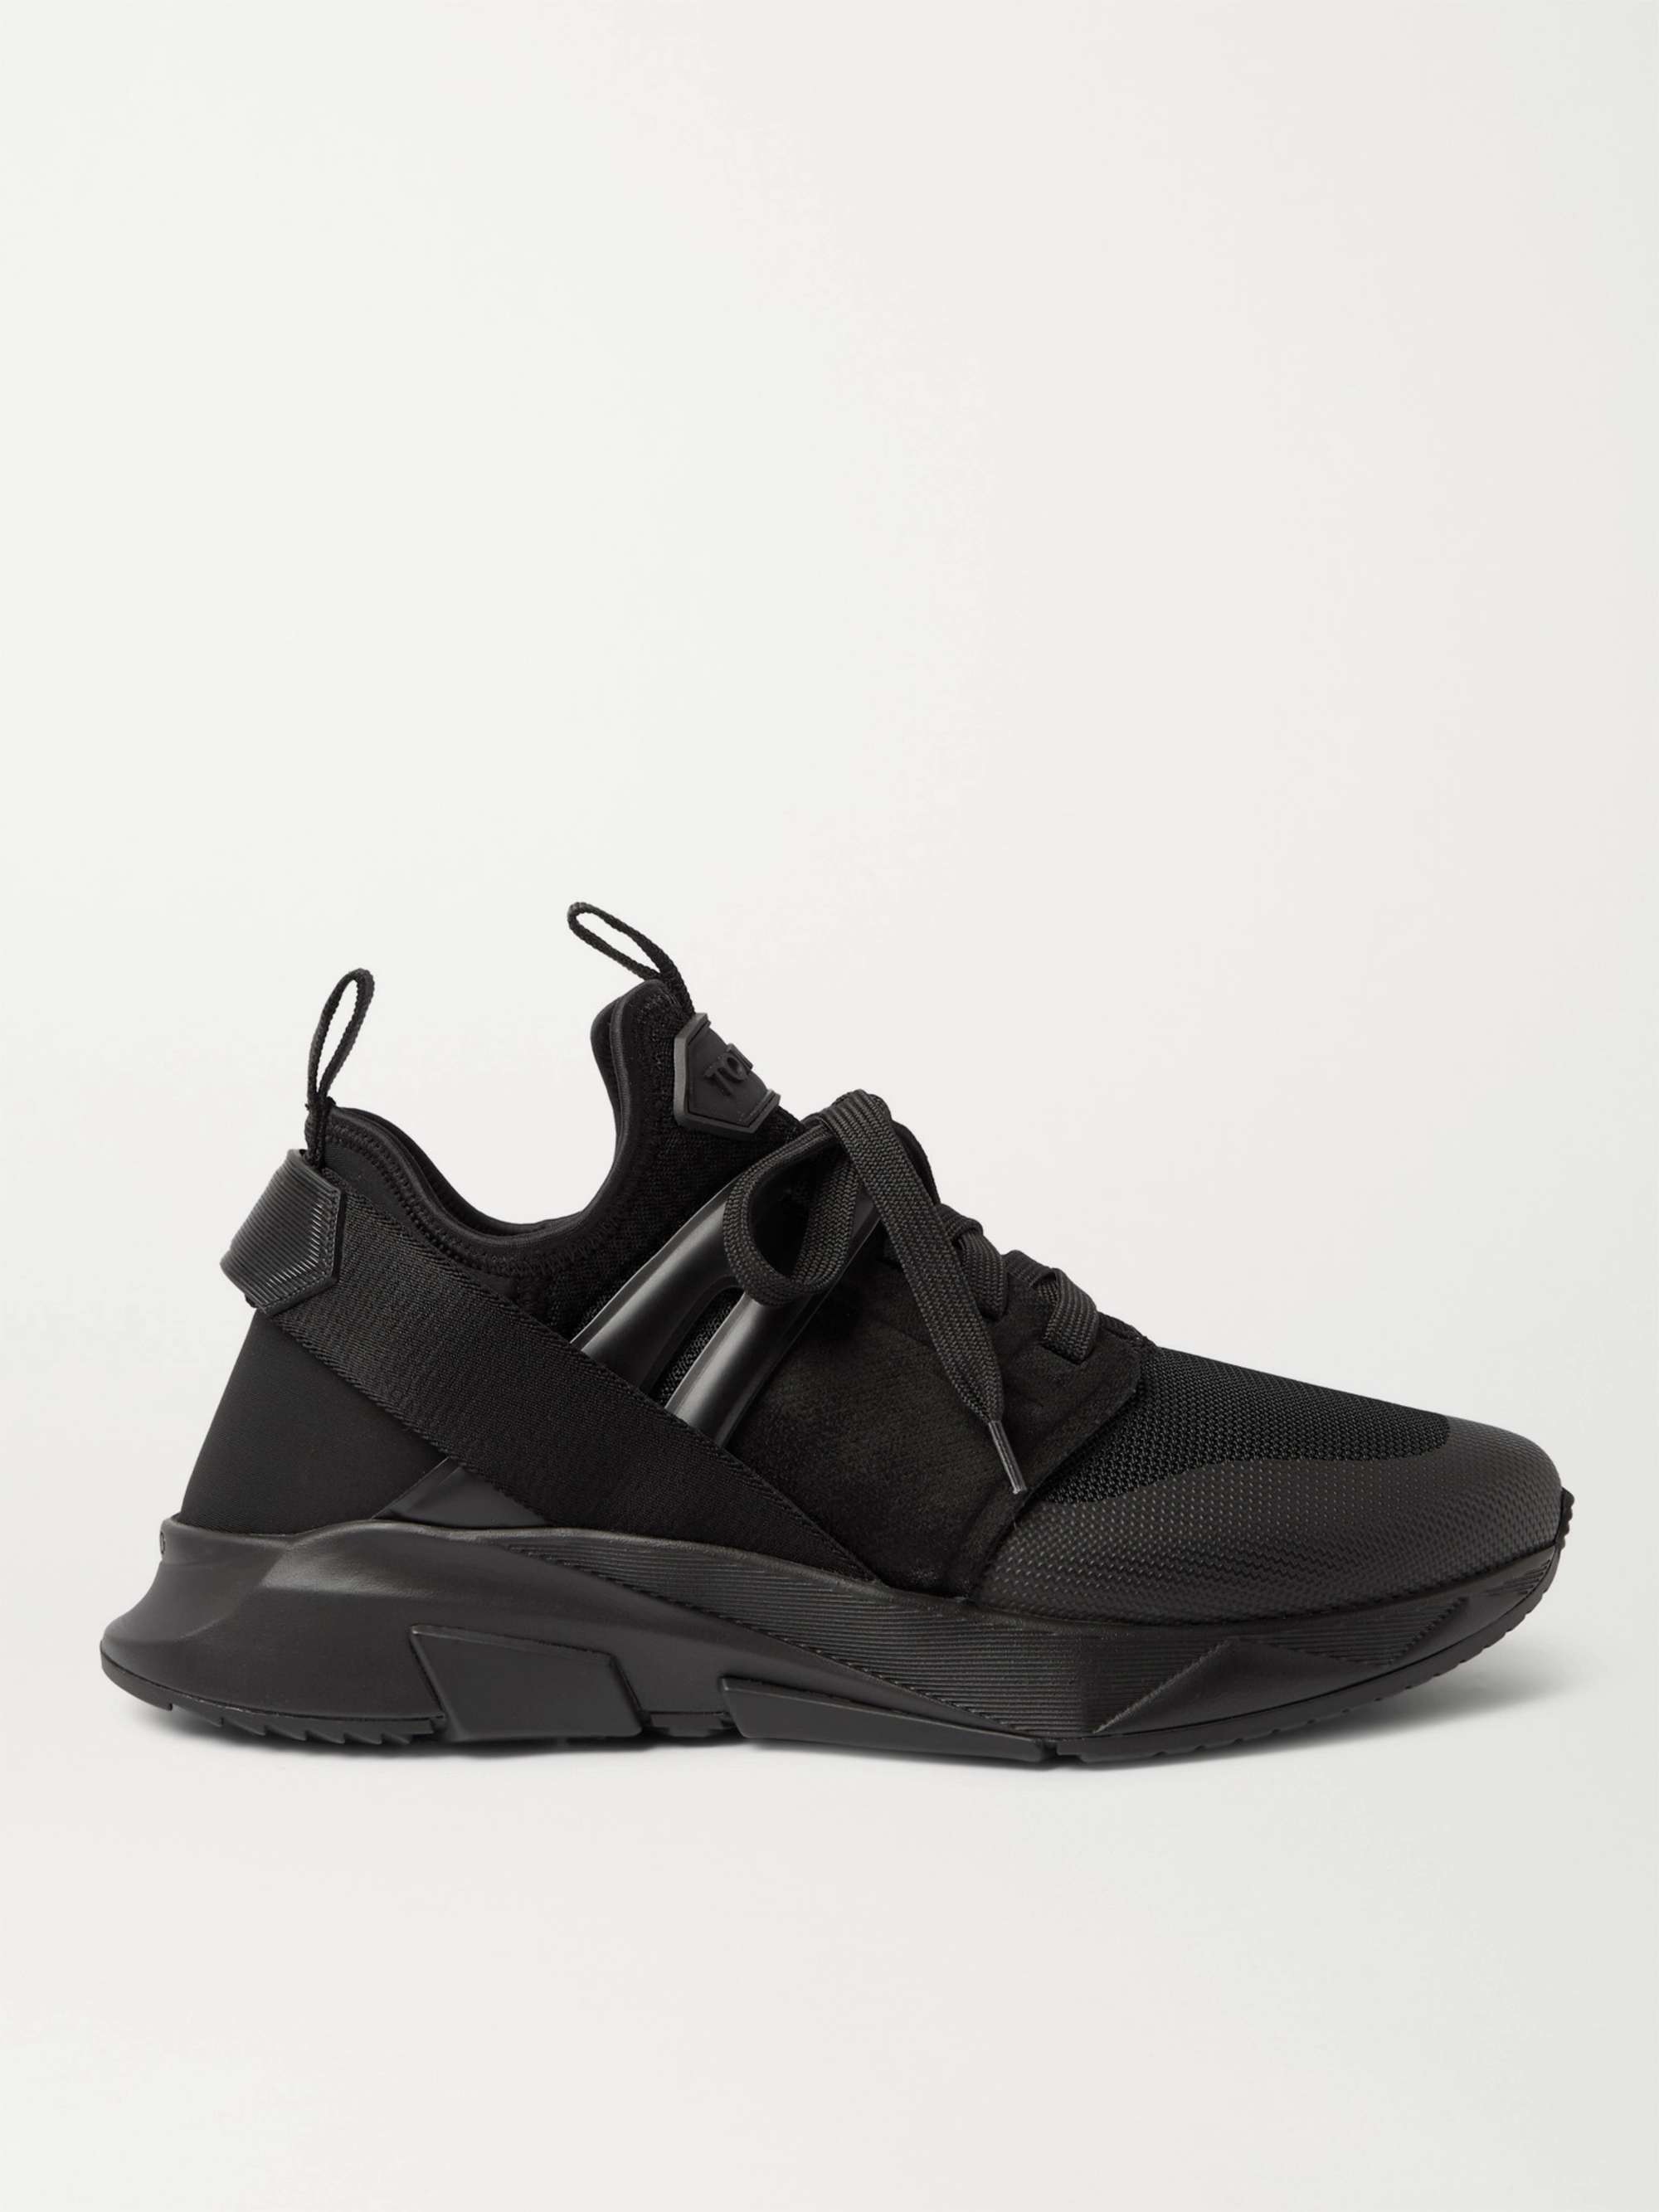 TOM FORD Jago Neoprene, Suede and Leather Sneakers